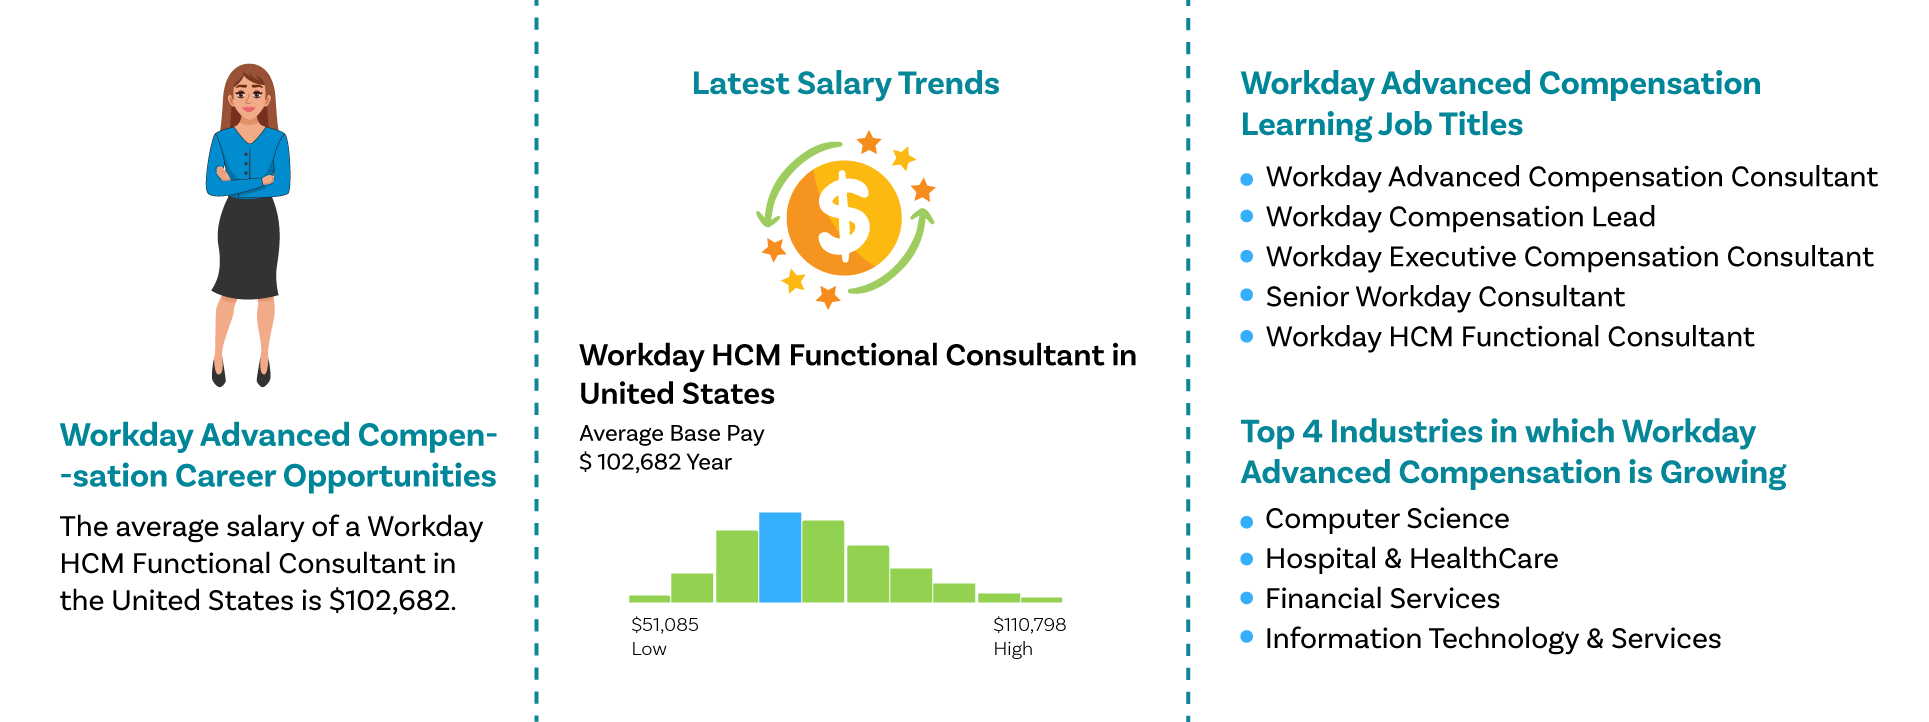 Workday Advanced Compensation Job Outlook